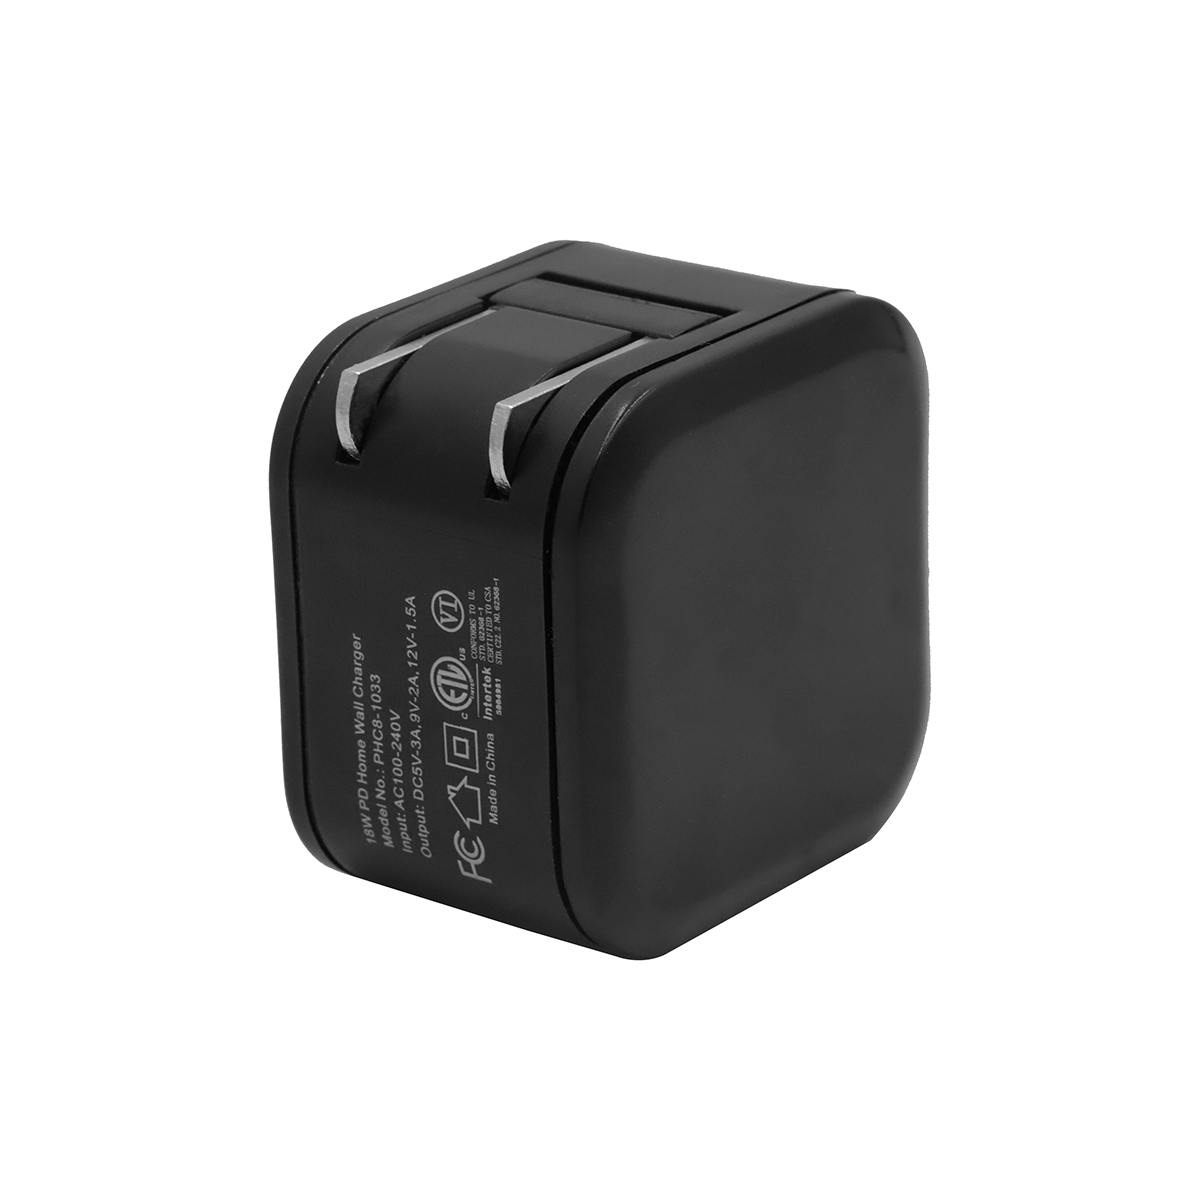 2. LM-1033 PD 18W Wall Charger with a Indicator Light Bulk Purchase and Corporate purchase from China Union Power -Description-